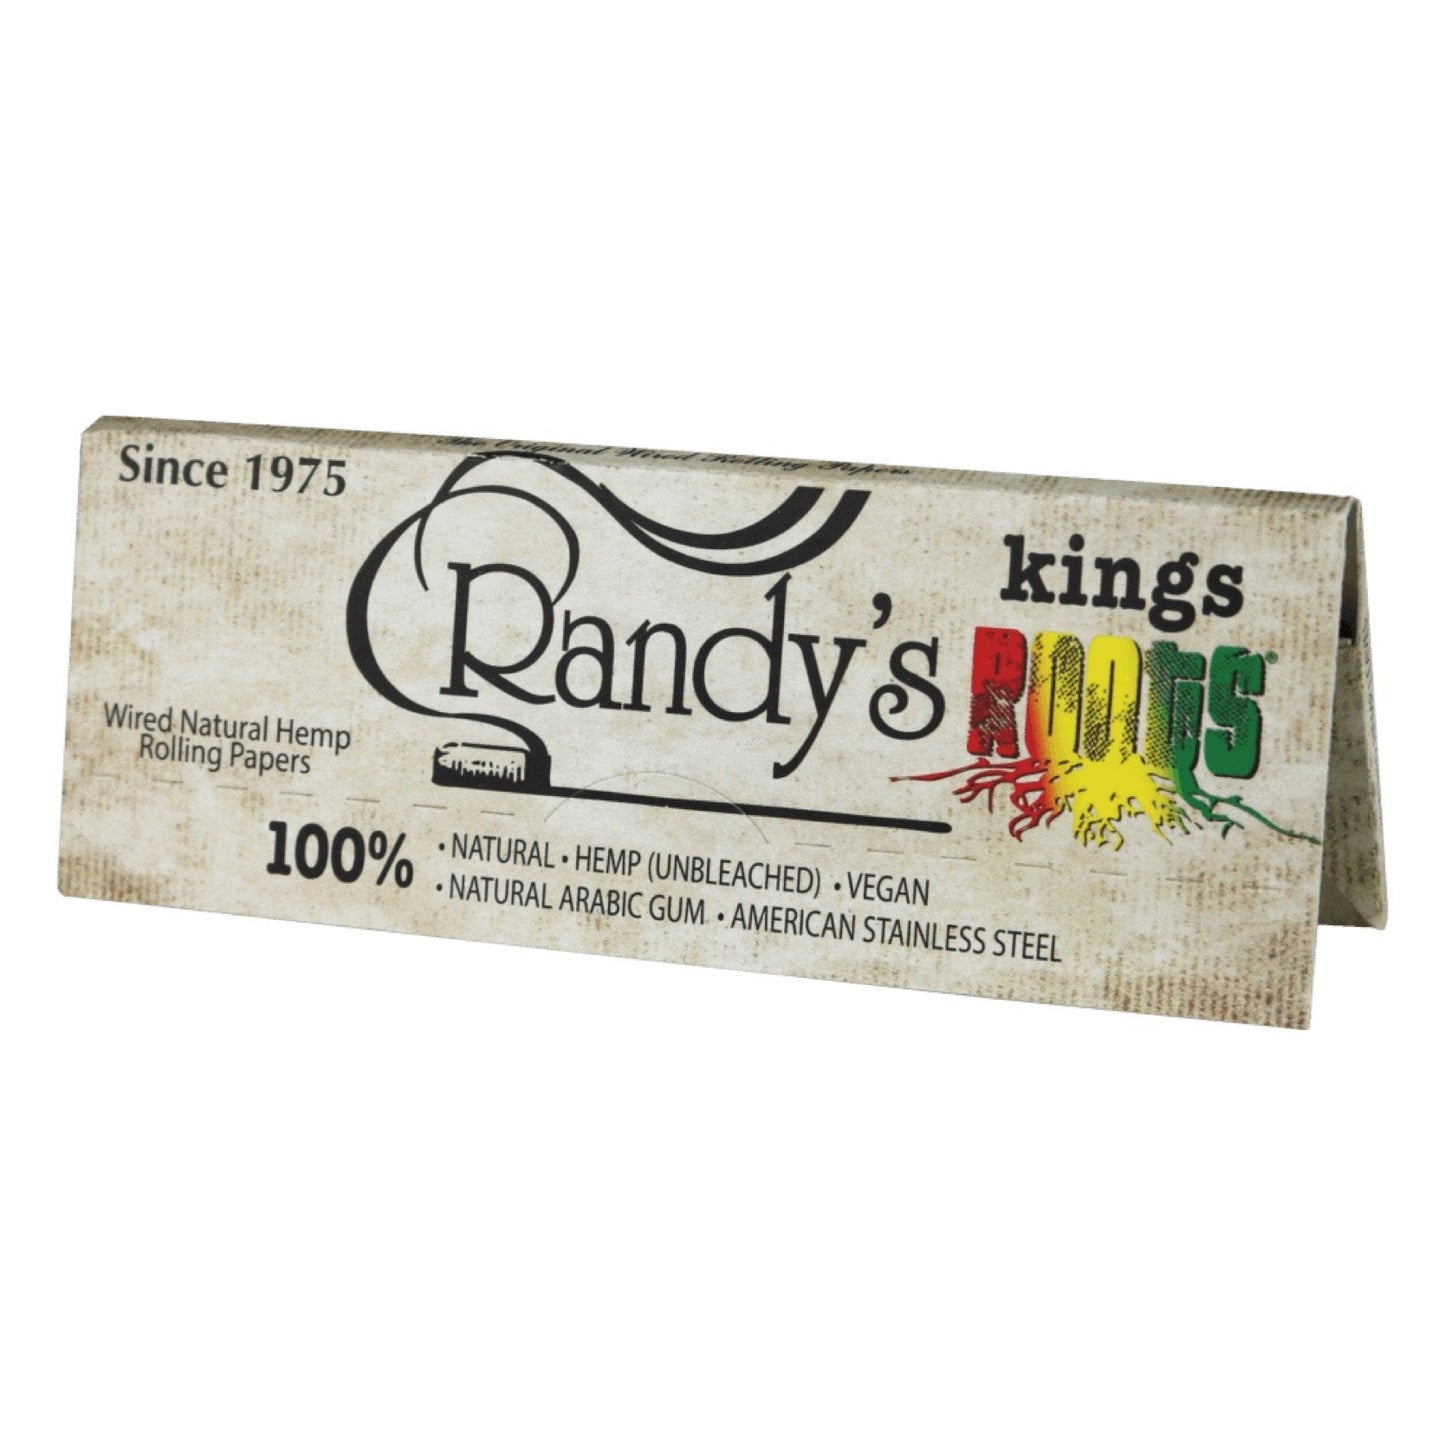 Randyâ€™s King Roots - XL Organic Hemp Wired Rolling Papers